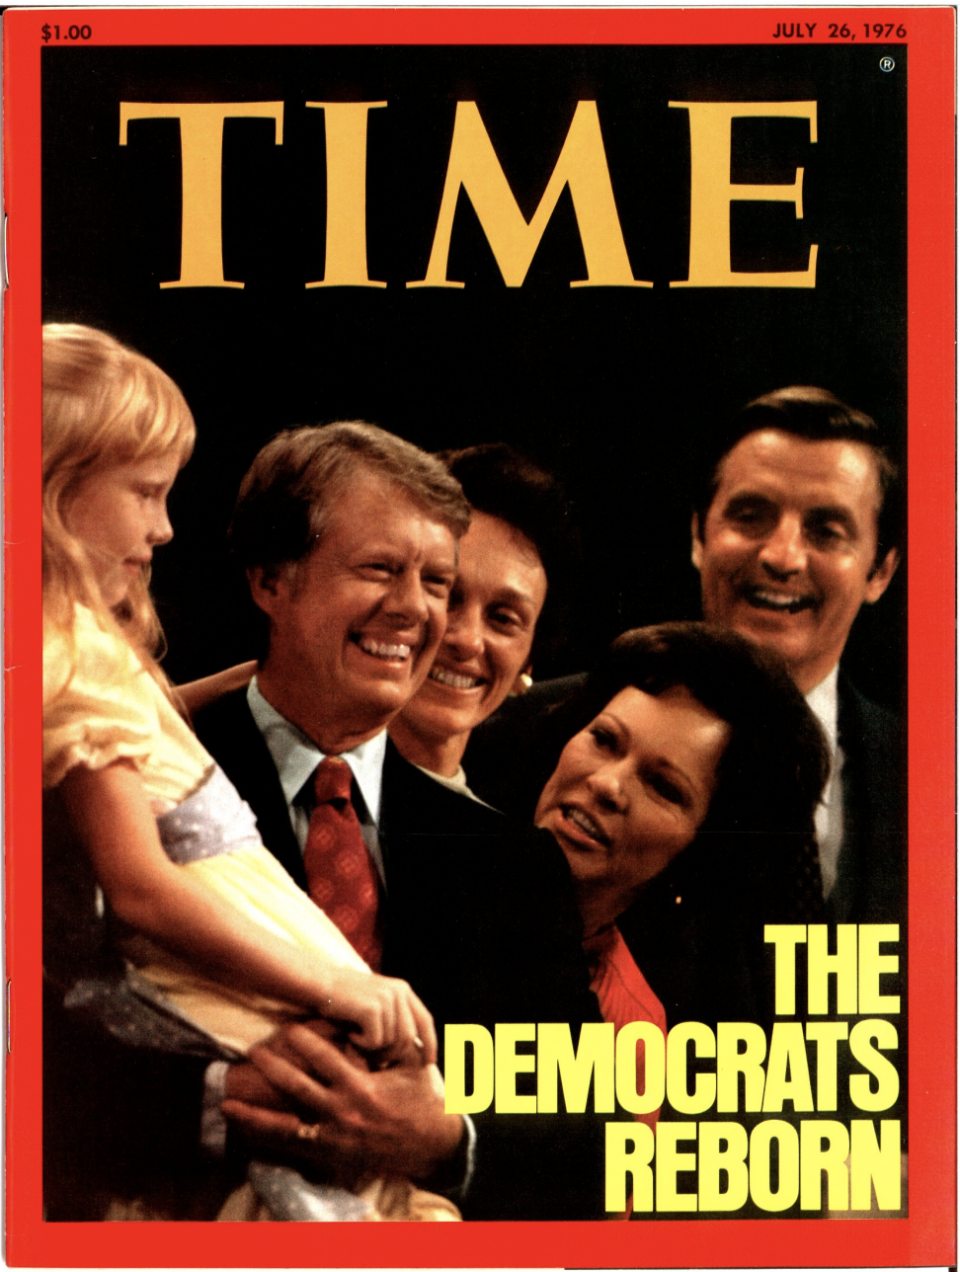 The cover of TIME Magazine the week of July 26, 1976<span class="copyright">TIME Magazine</span>